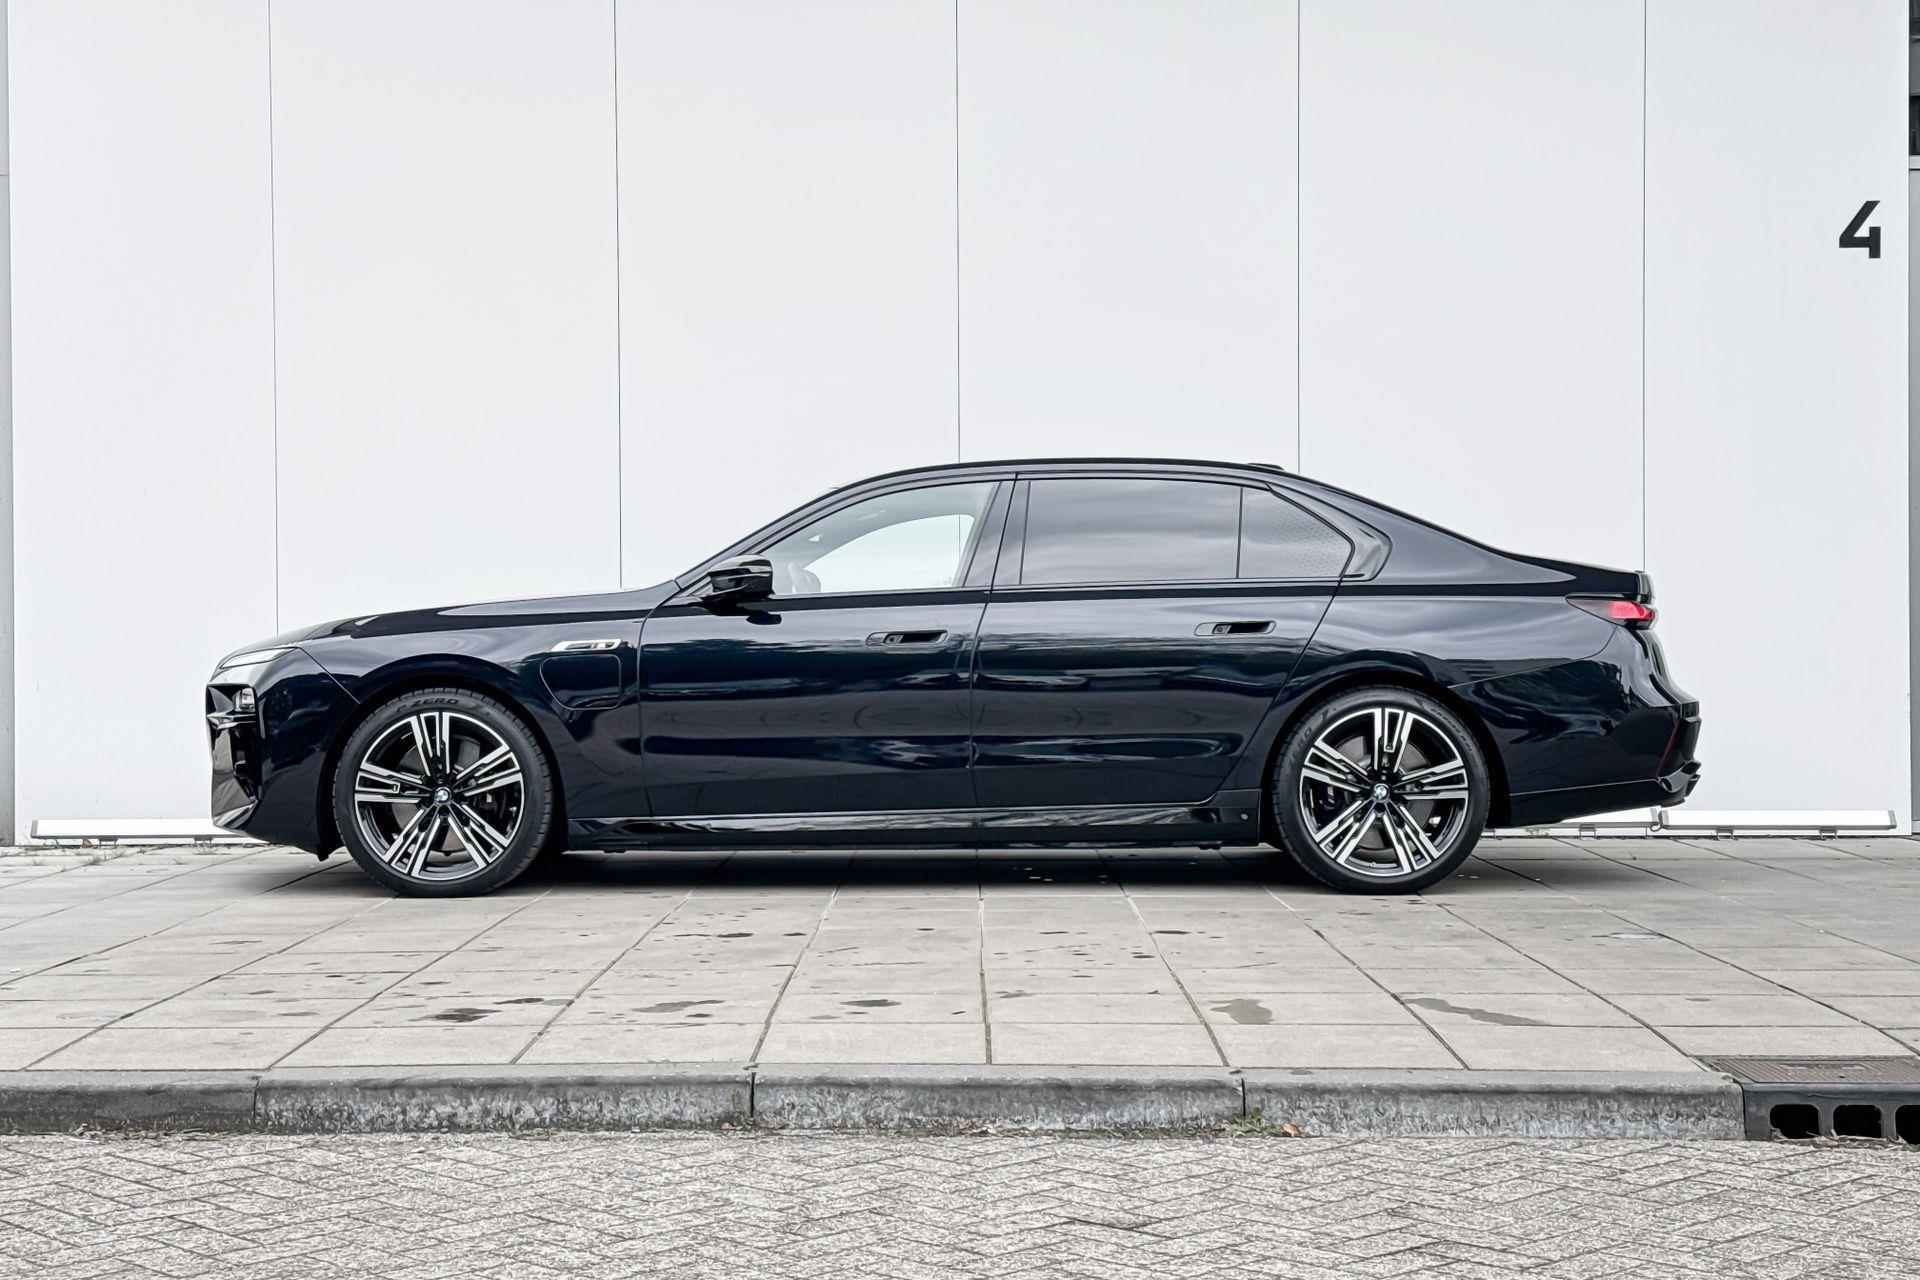 BMW 7 Serie M760e xDrive Bowers & Wilkins Diamond / Executive Lounge / Executive Pack / Performance Pack / Connoisseur Pack / Climate Acoustics Pack / Iconic Glow / Elektrische portieren / CraftedClarity - 2/27